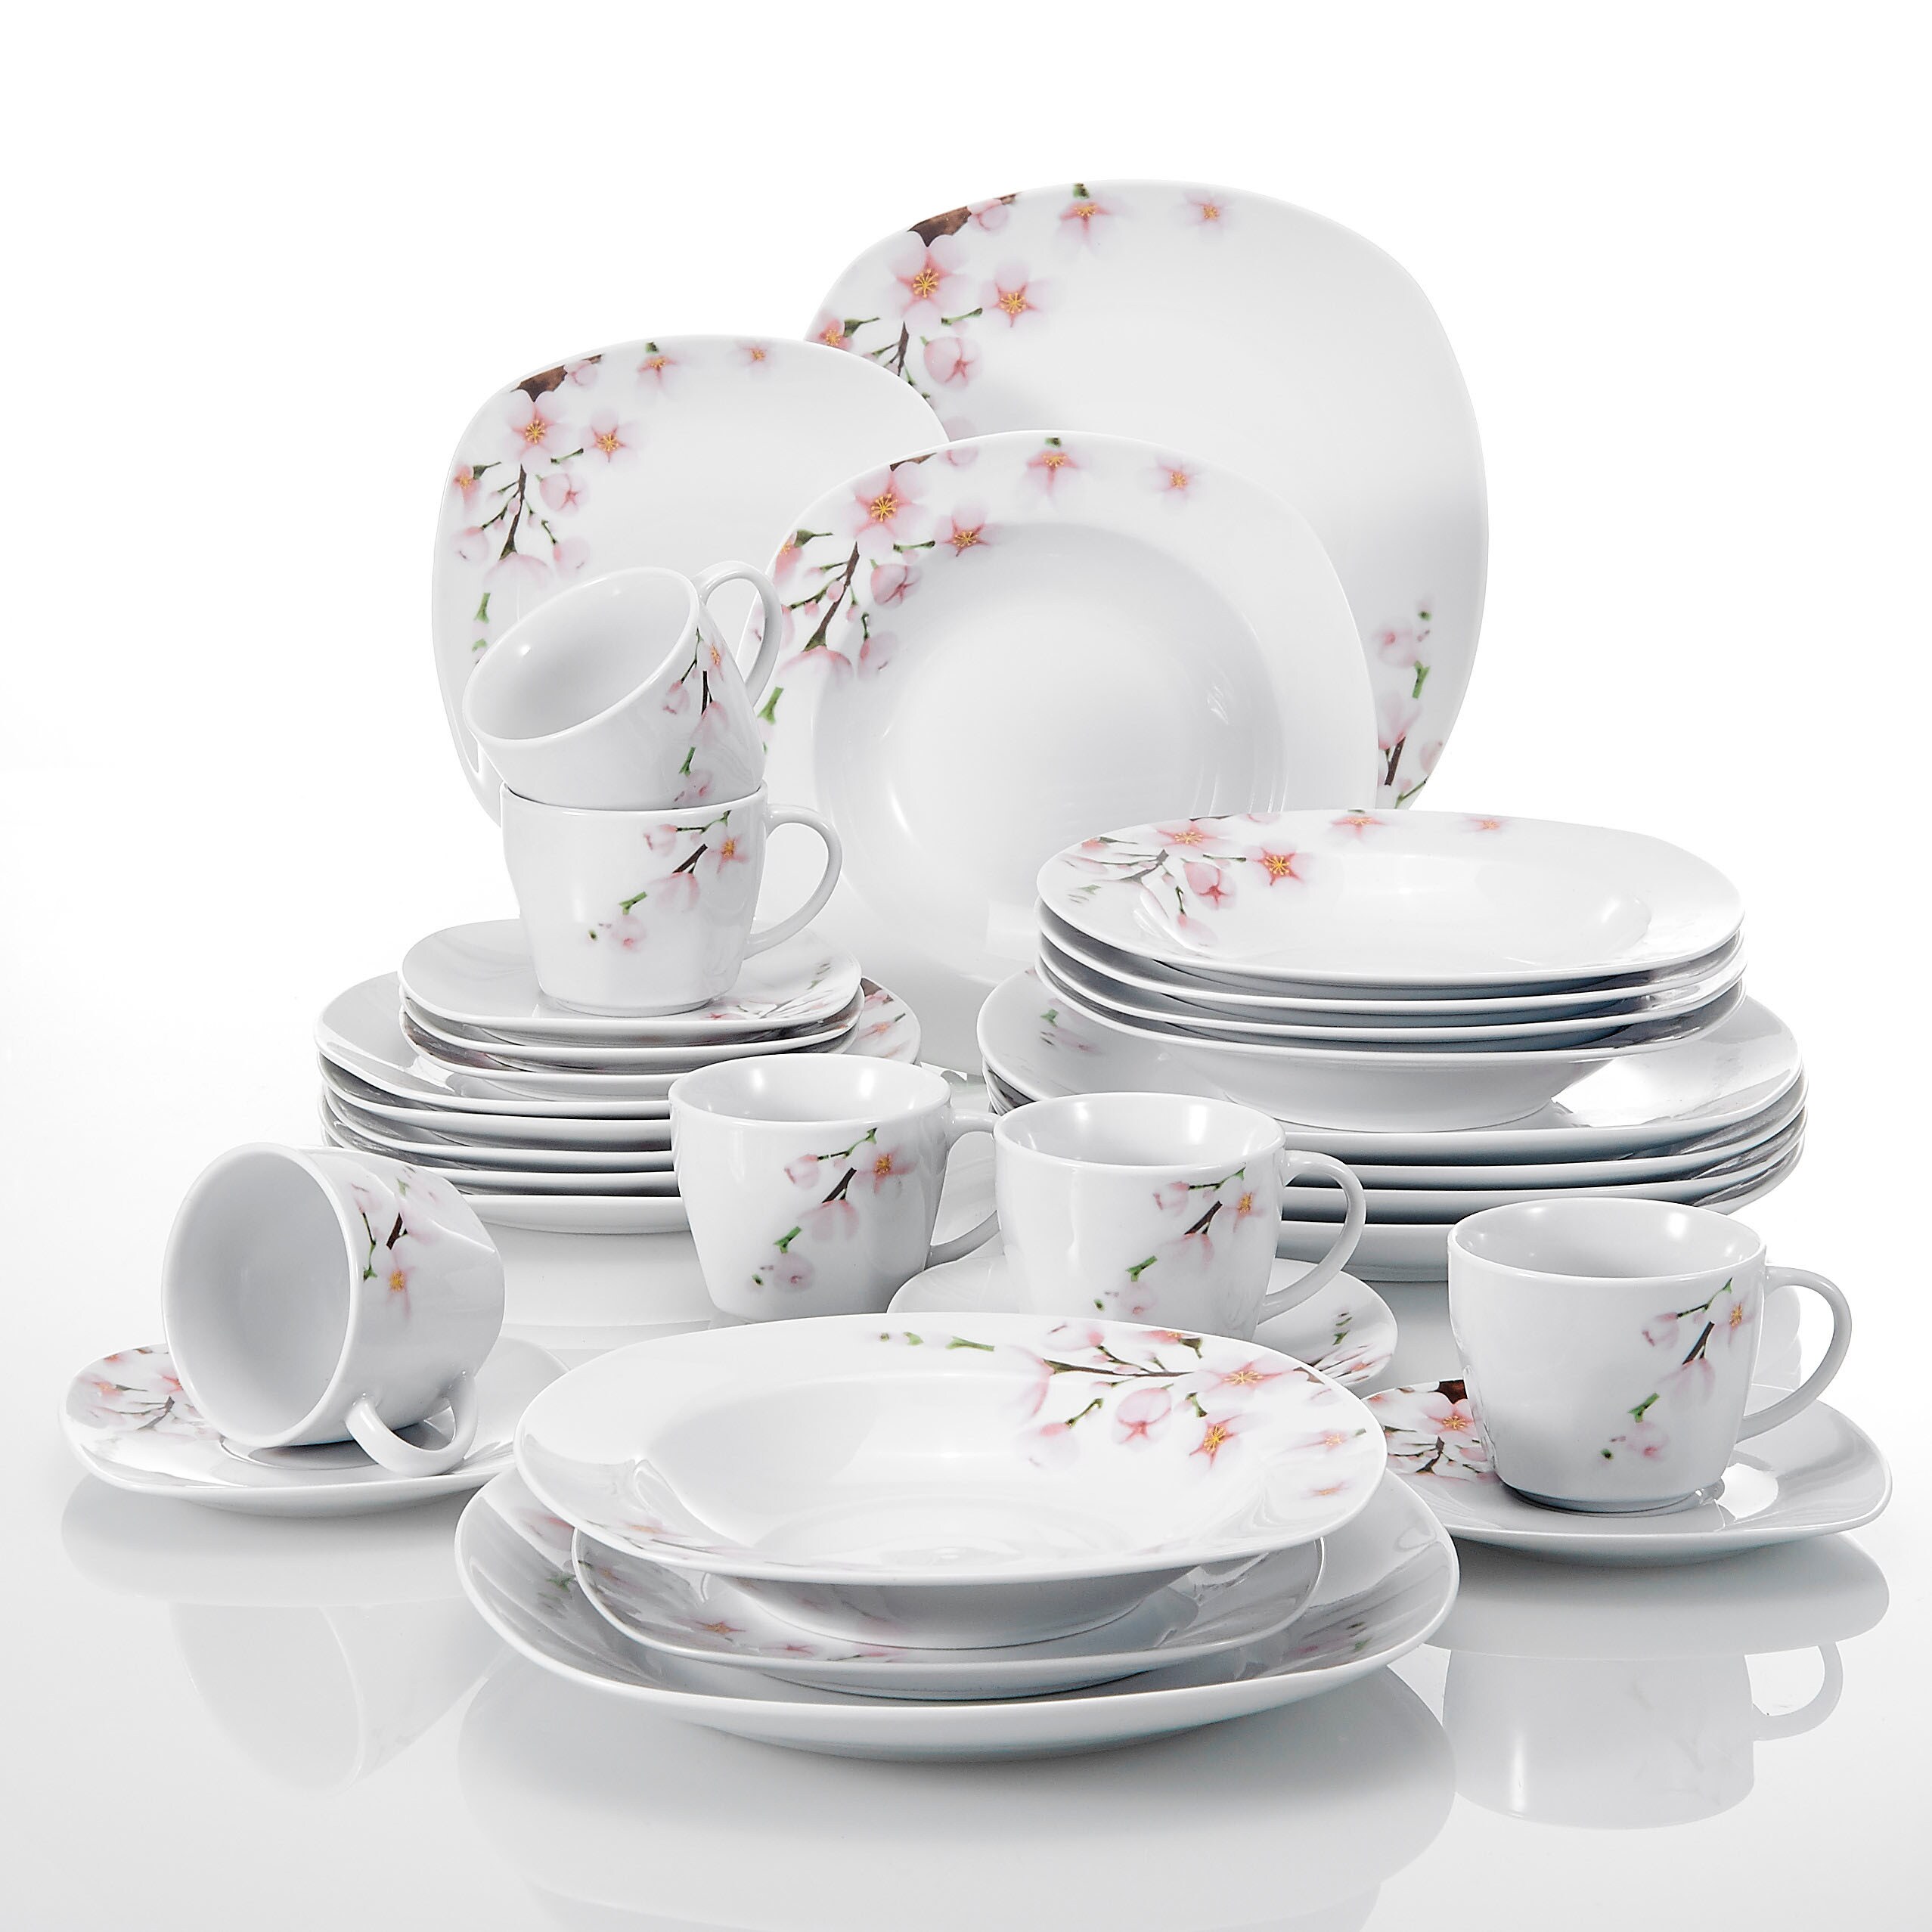 VEWEET Zoey 30-Piece Ivory White Black Decals Porcelain Dinner Combi-Set with Cup & Saucer Set Stoneware Plate Sets Service for 6 